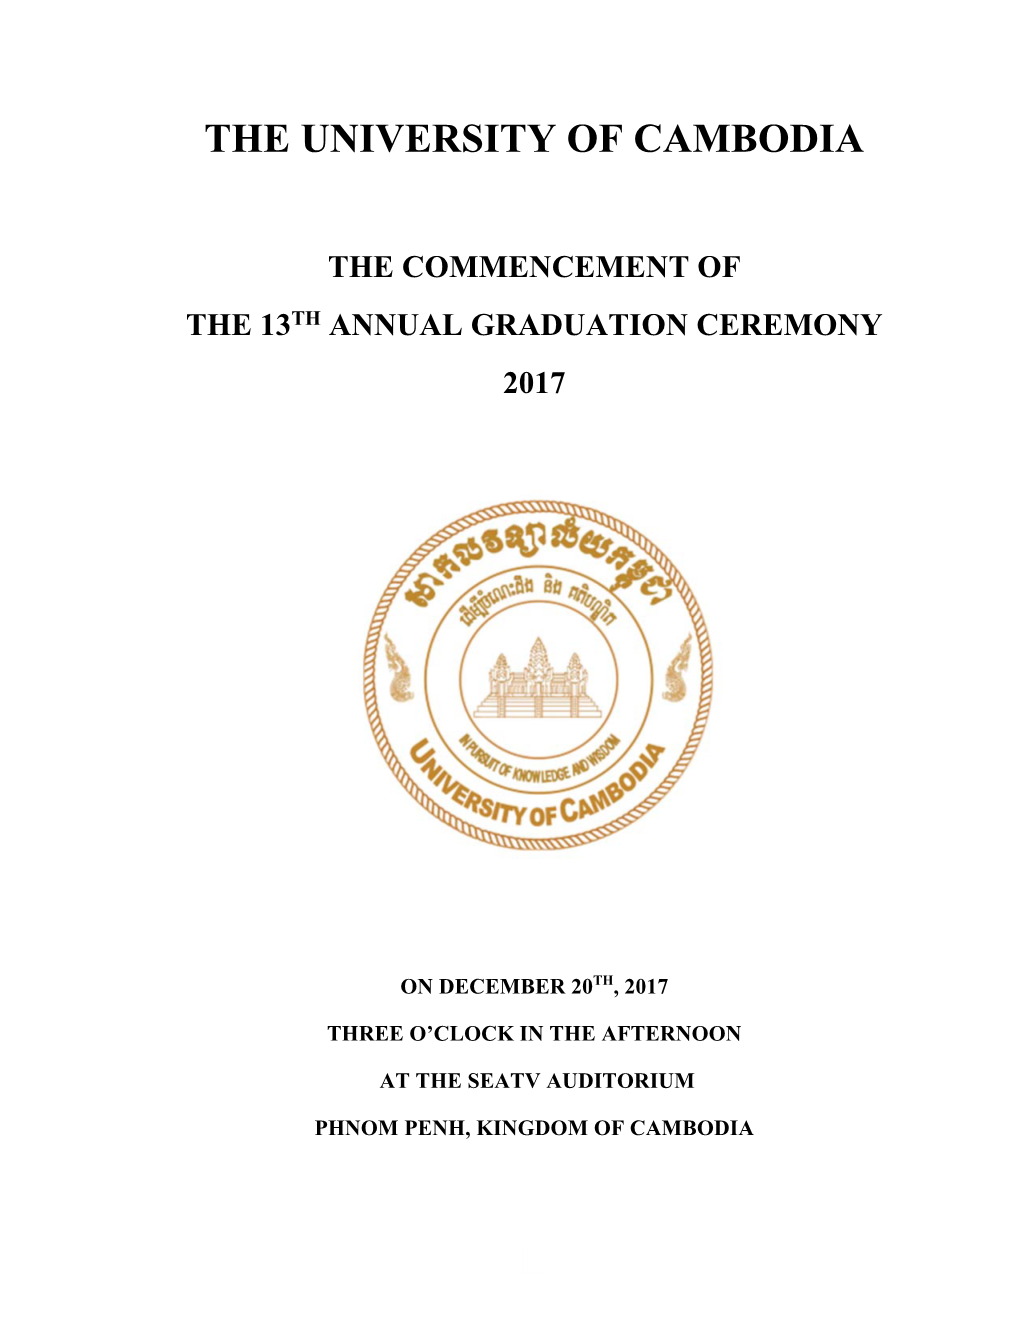 The Commencement of the 13Th Annual Graduation Ceremony 2017